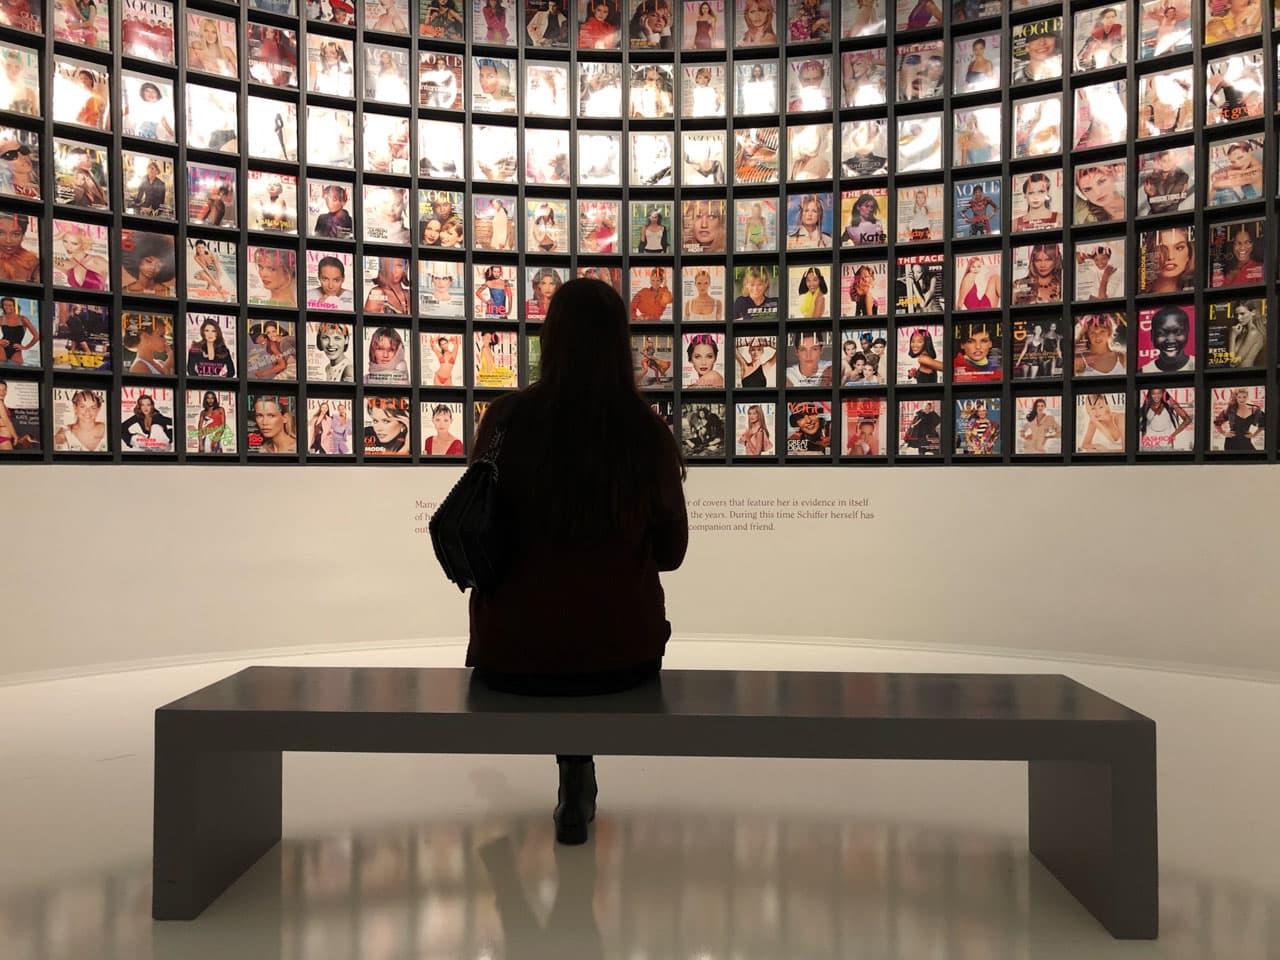 A woman sitting on a bench with her back turned to the camera looking at the wall of framed old magazine covers